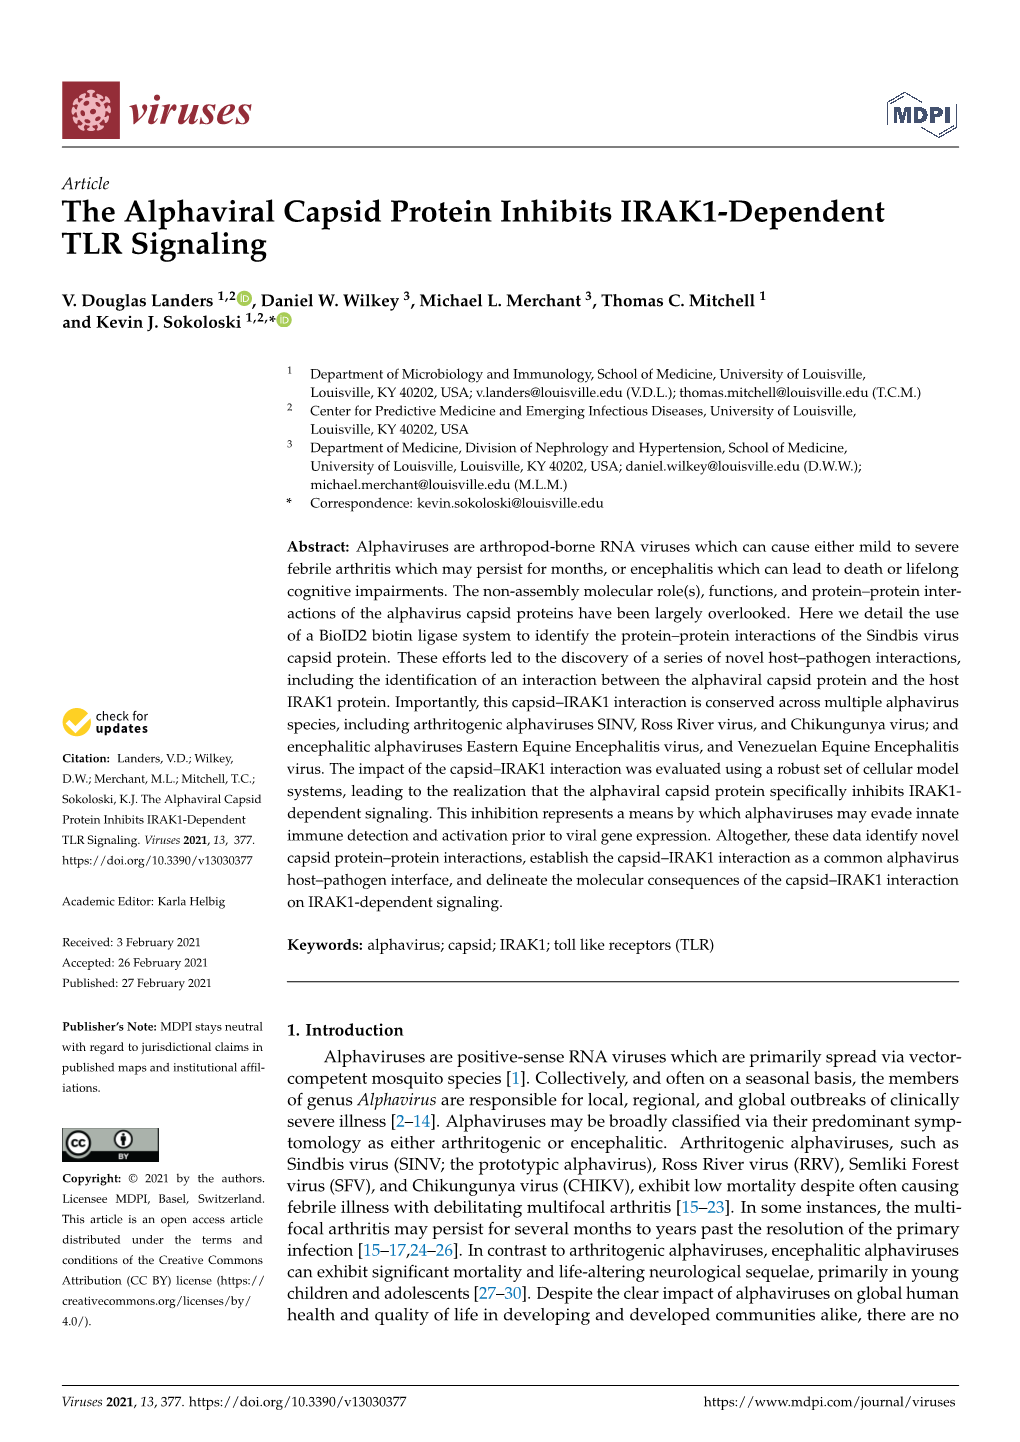 The Alphaviral Capsid Protein Inhibits IRAK1-Dependent TLR Signaling